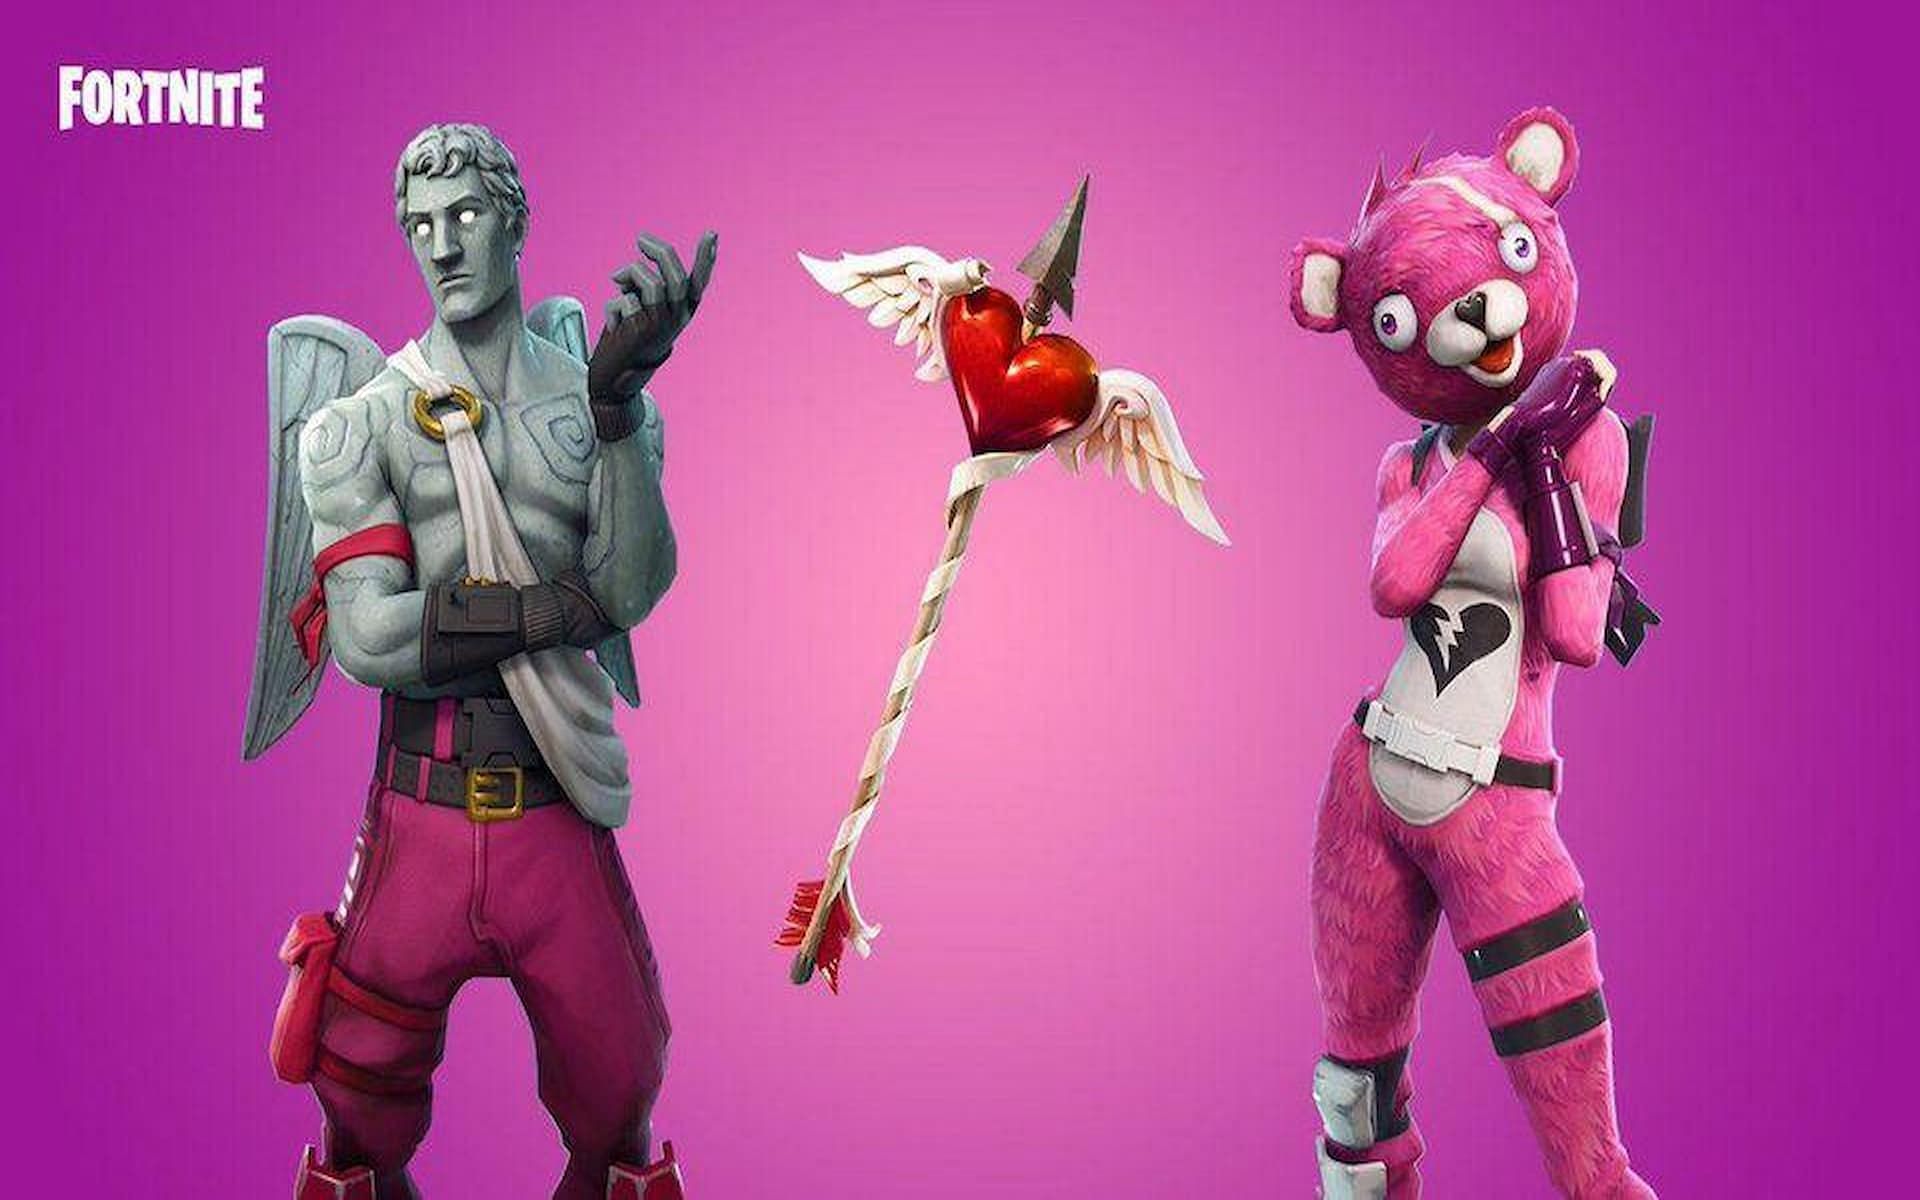 There have been plenty of skins that exemplify love in Fortnite (Image via Epic Games)